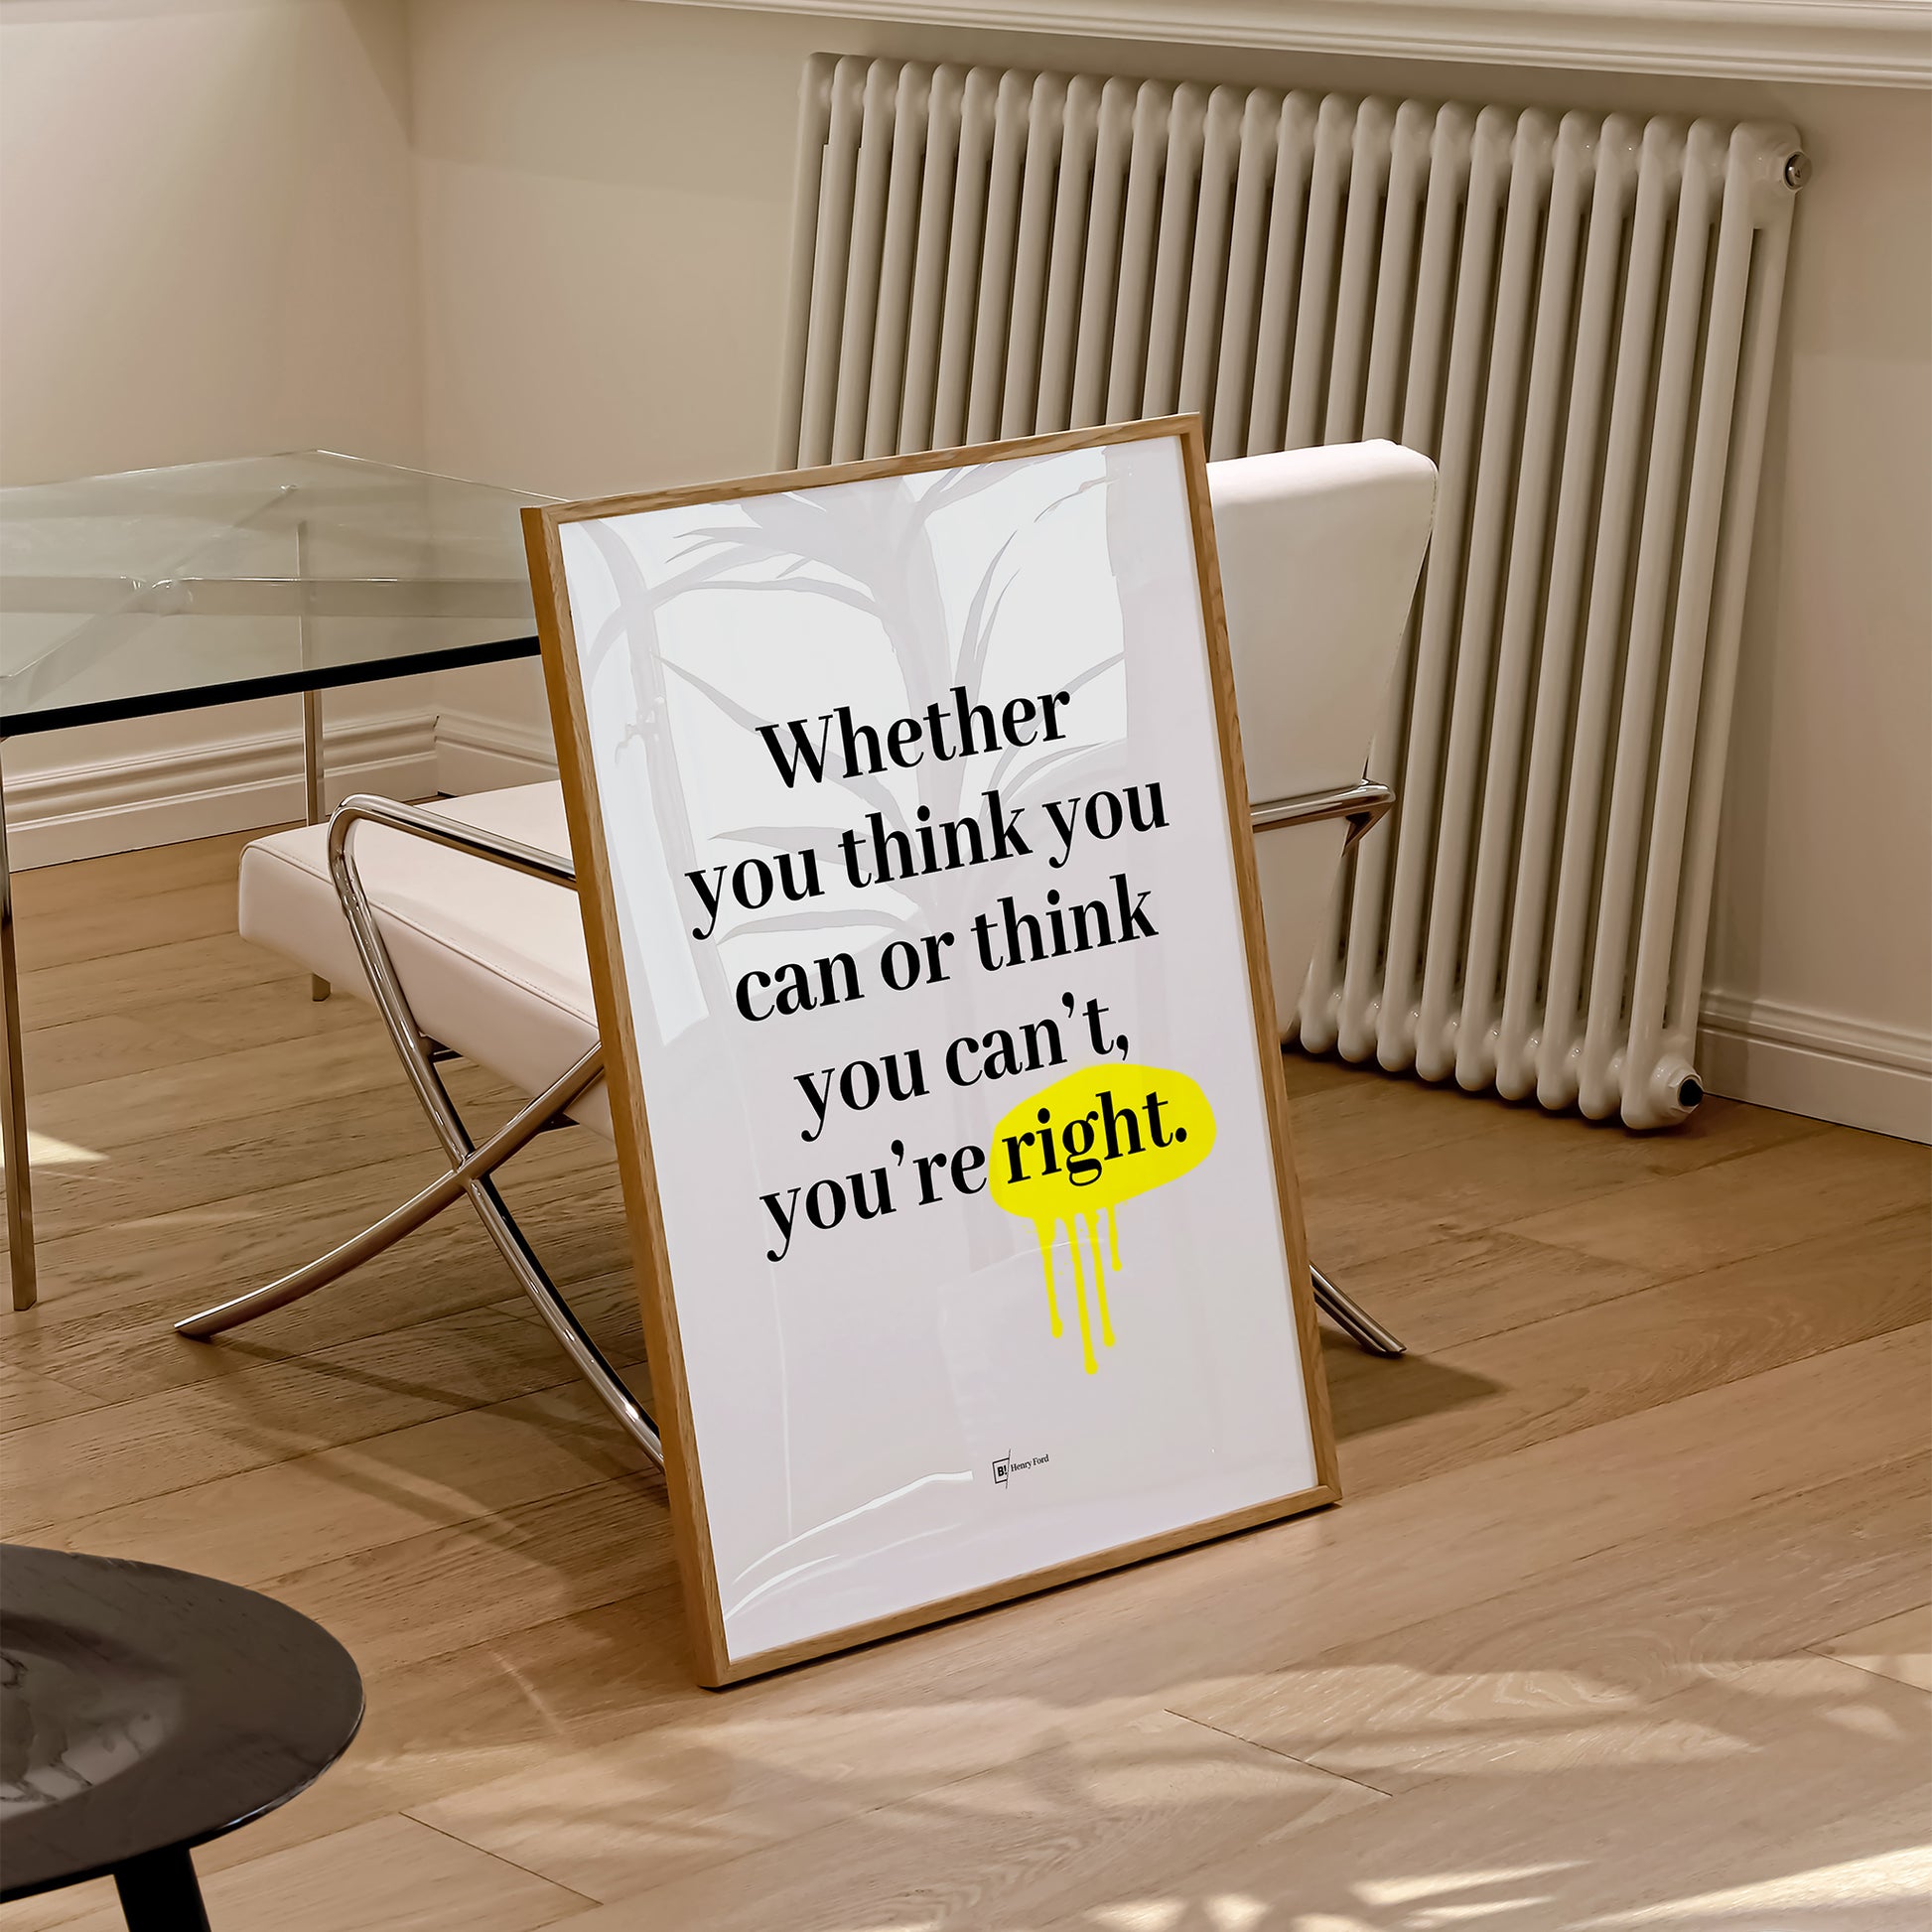 Be inspired by Henry Ford's famous "Whether you think you can or think you can't, you're right" quote art print. This artwork was printed using the giclée process on archival acid-free paper and is presented in a natural oak frame that captures its timeless beauty in every detail.